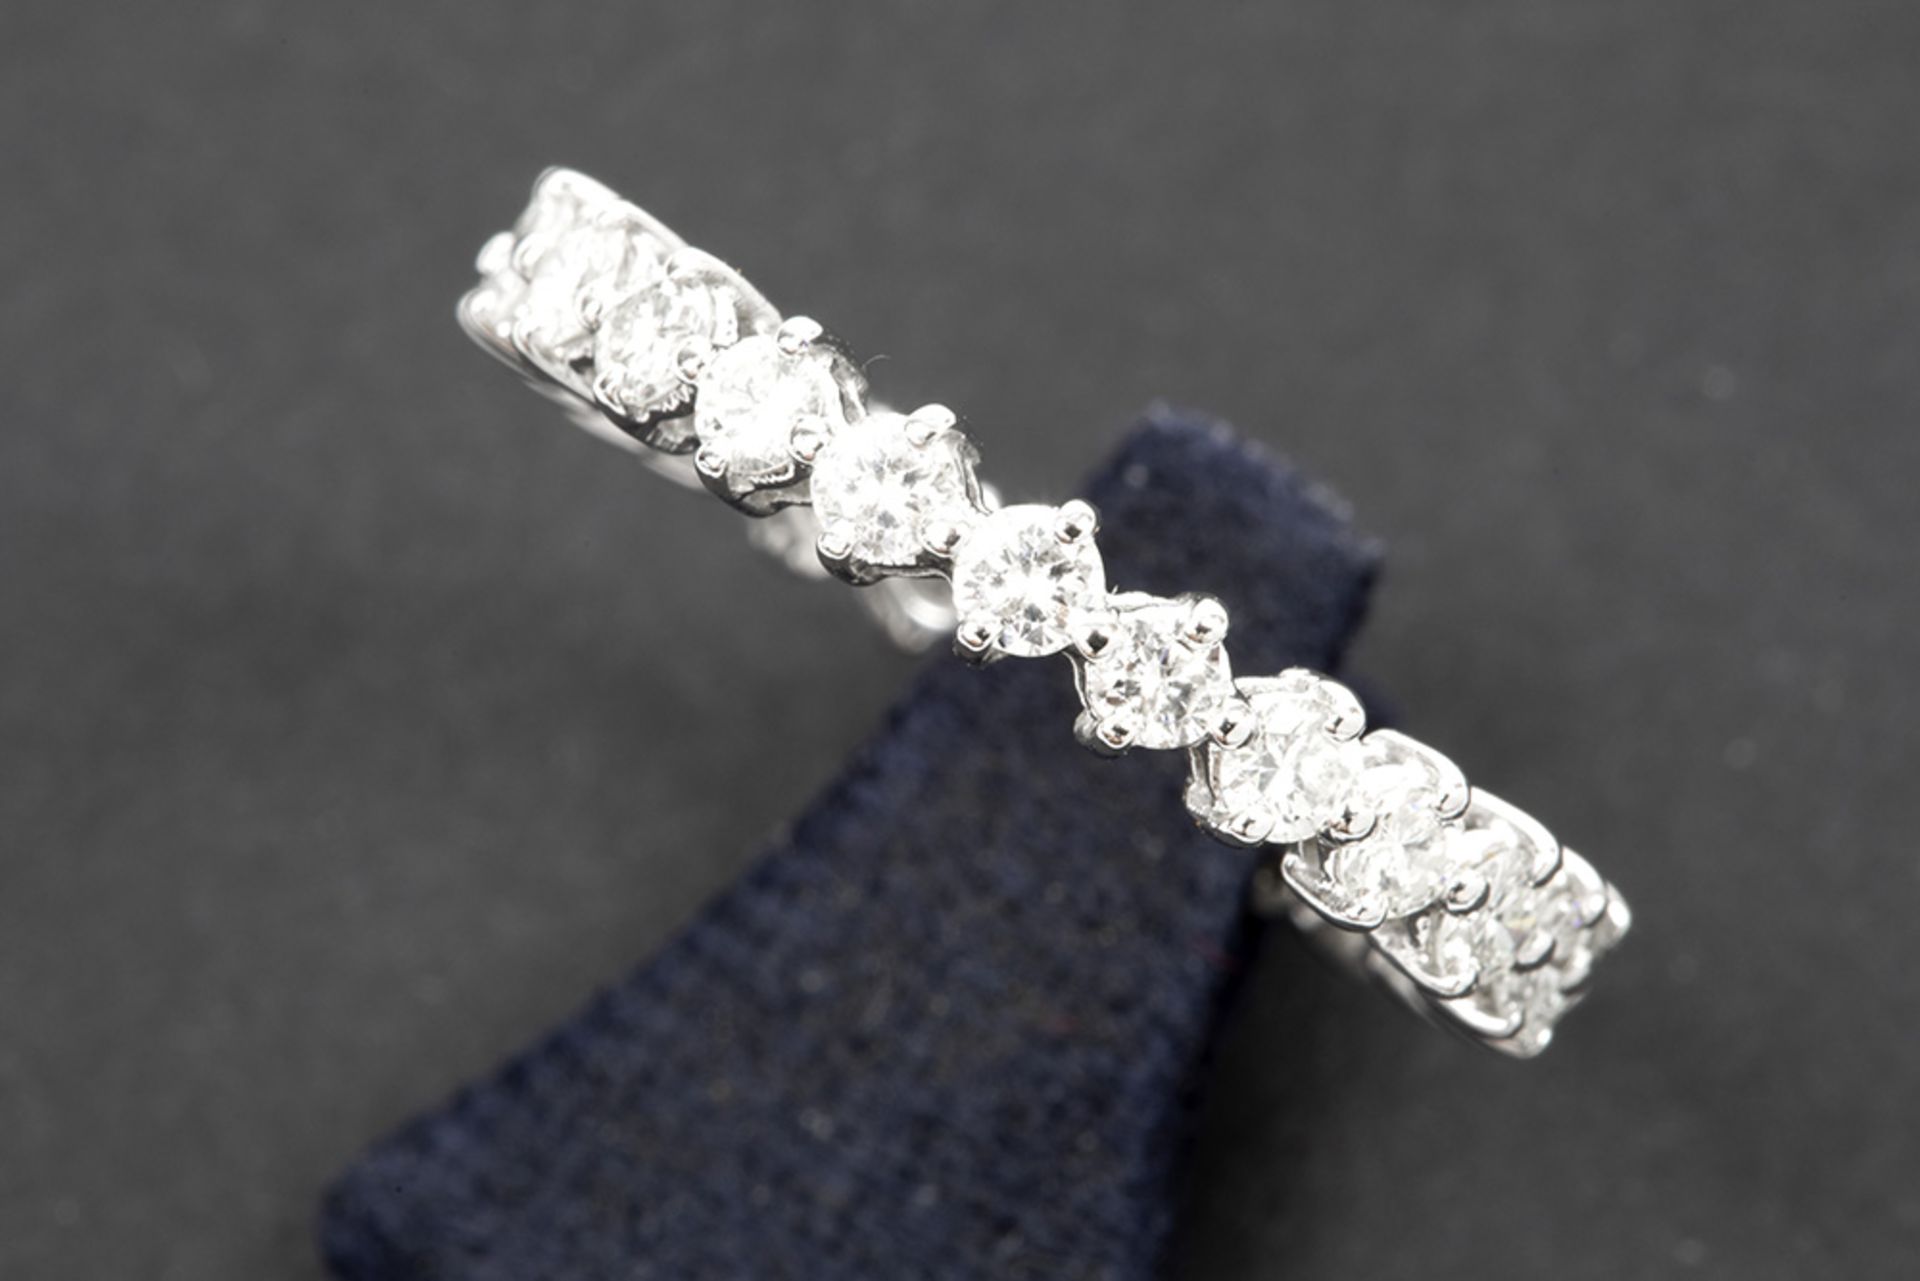 ring in white gold (18 carat) with ca 1,20 carat of quality brilliant cut diamonds || Zgn alliance à